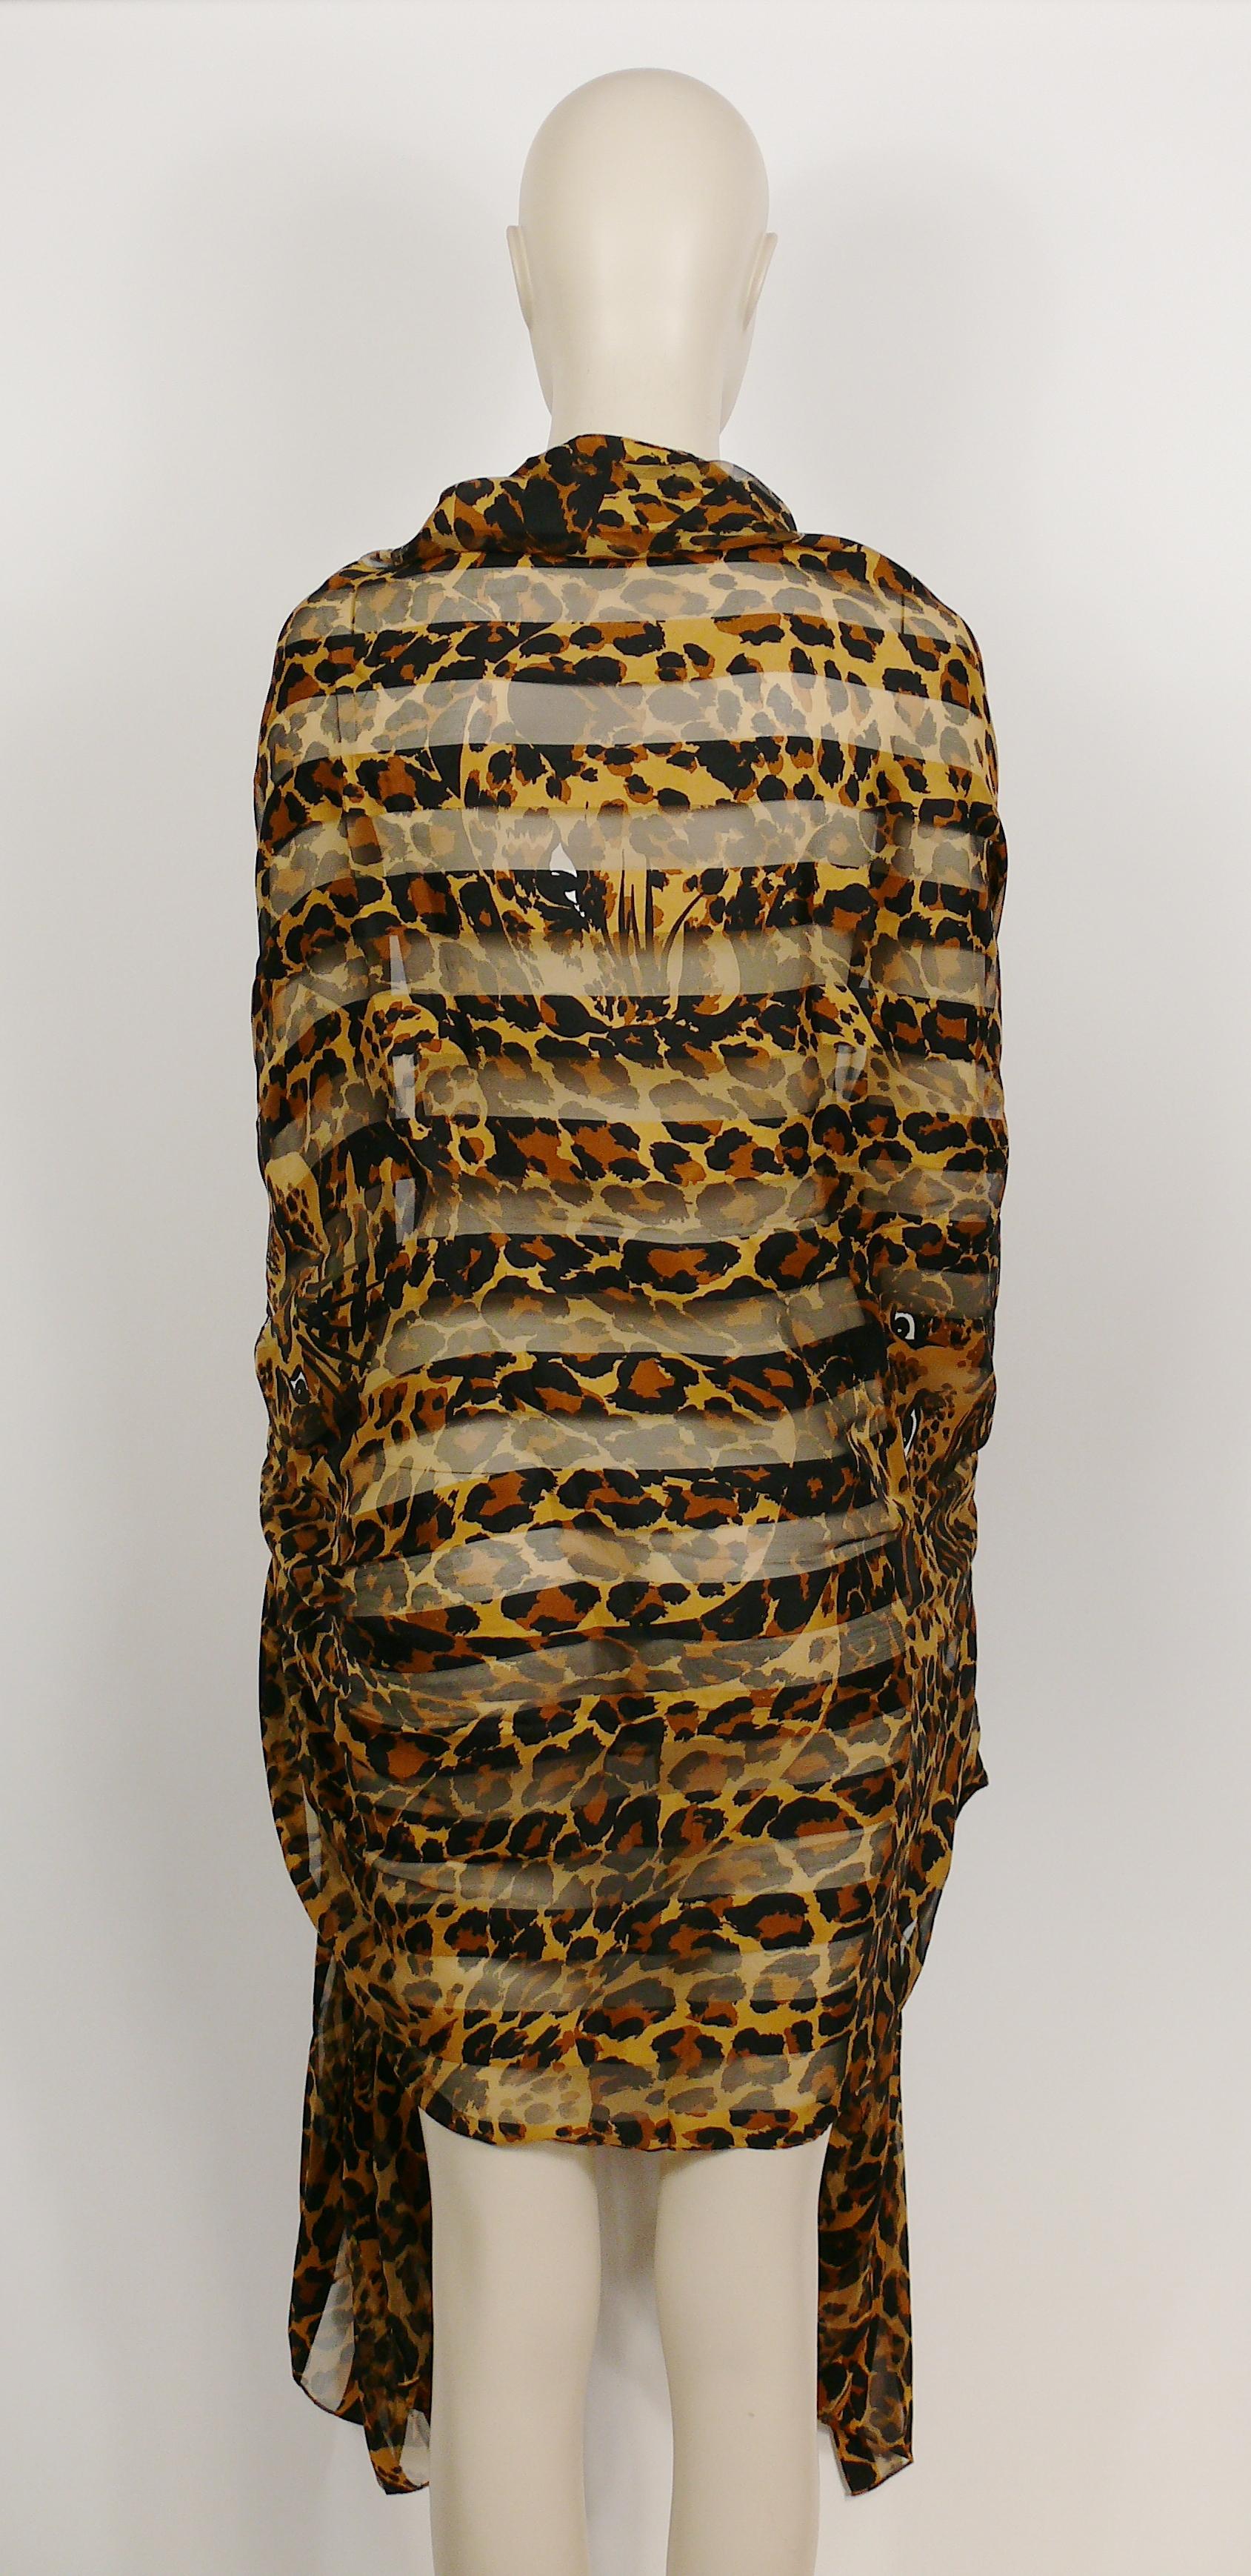 Yves Saint Laurent YSL Vintage Iconic Leopard Striped Sheer Print Stole In Good Condition For Sale In Nice, FR